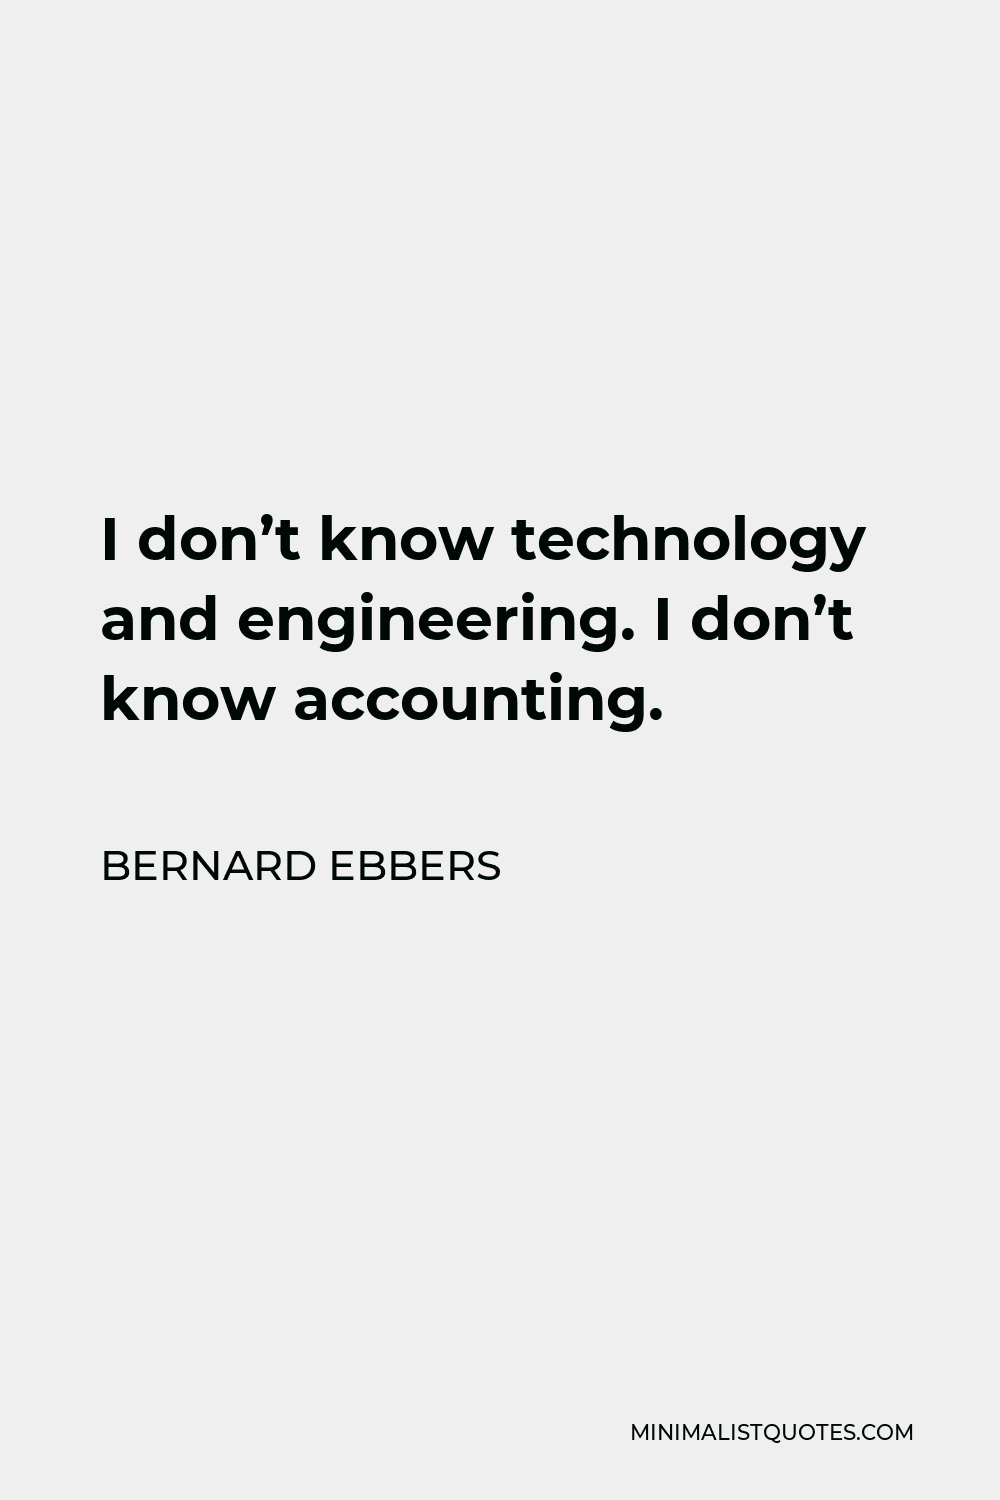 Bernard Ebbers Quote - I don’t know technology and engineering. I don’t know accounting.